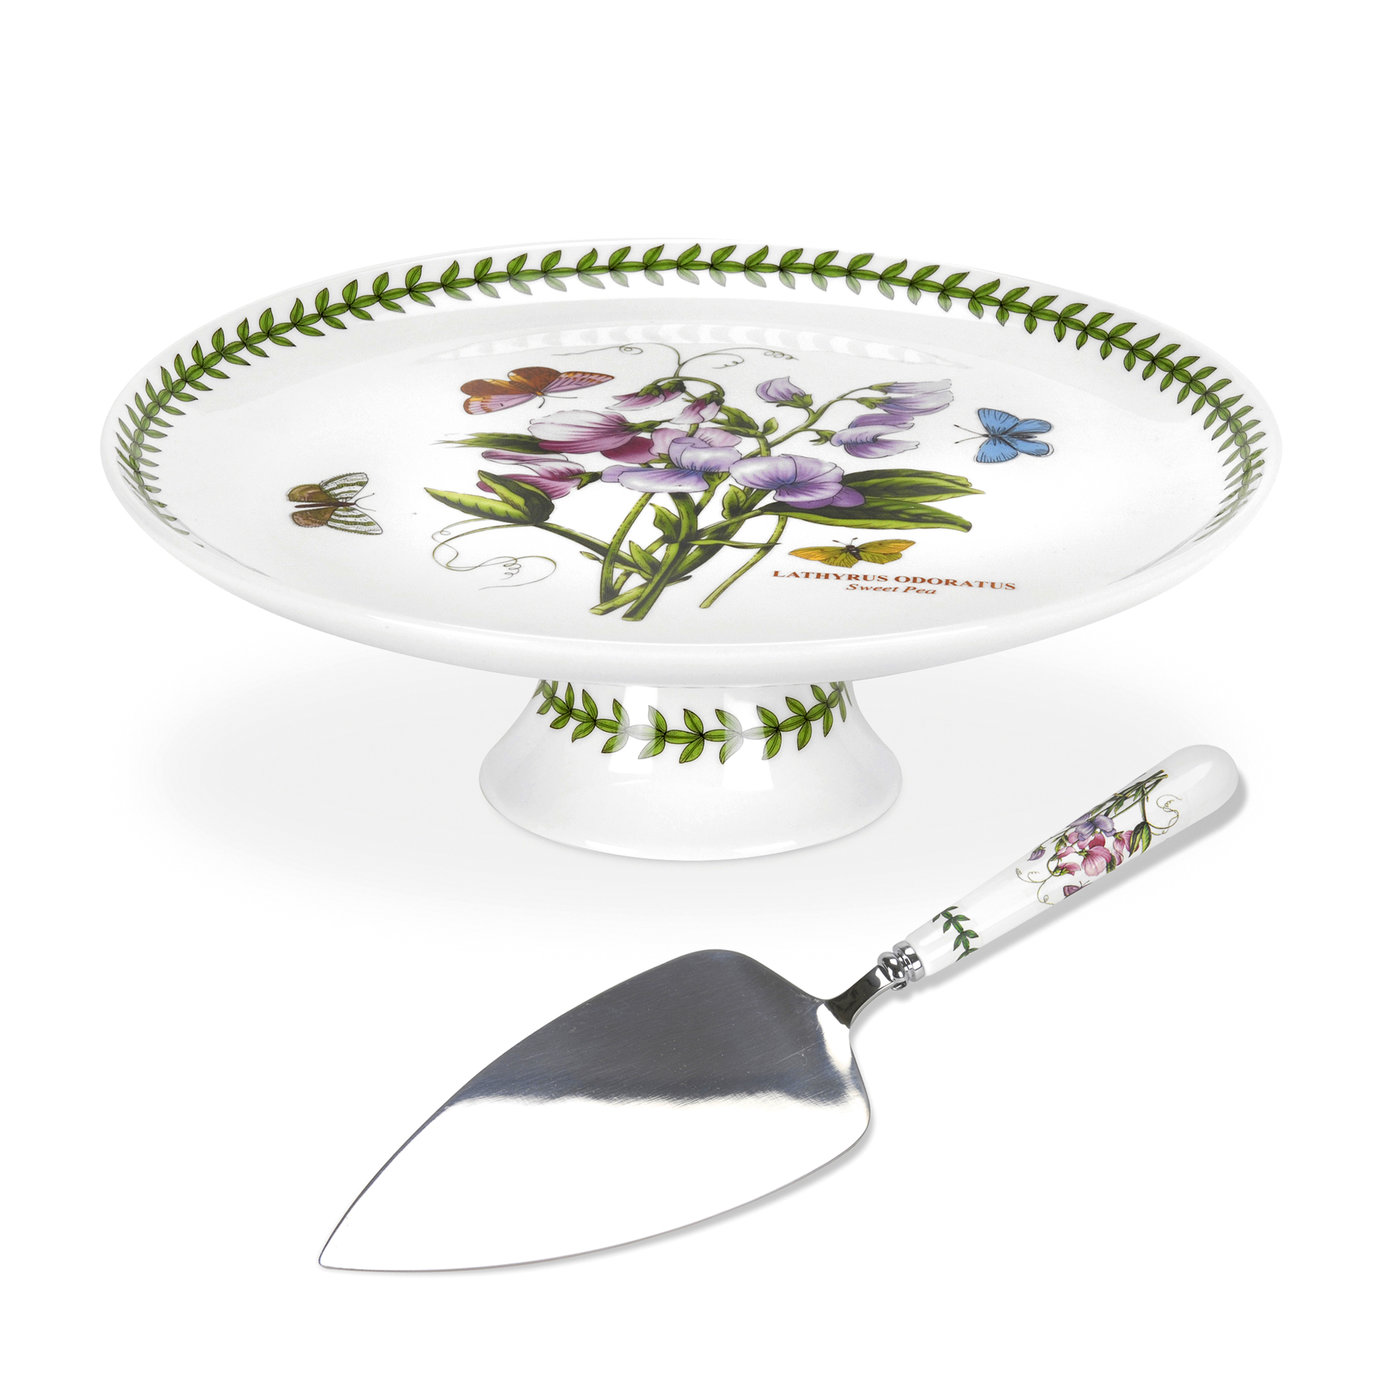 Botanic Garden 10 Inch Footed Cake Plate with Server (Sweet Pea) image number null